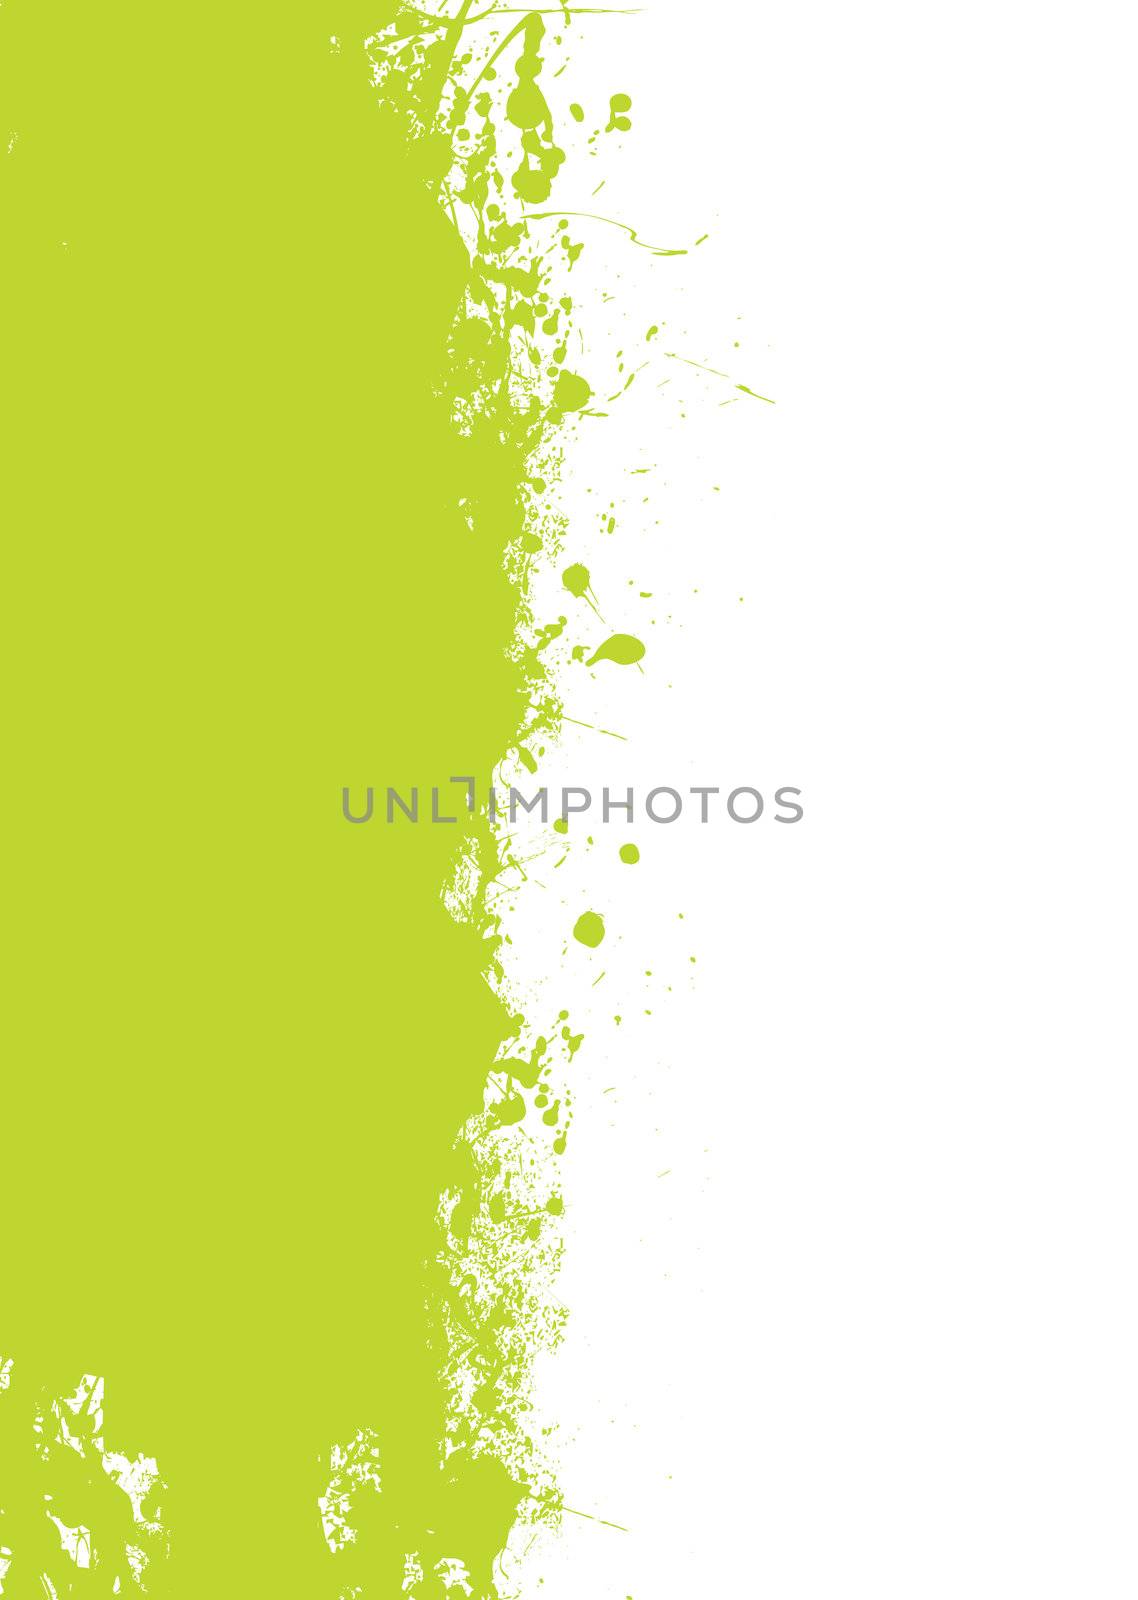 Green and white abstract grunge splat background with copyspace